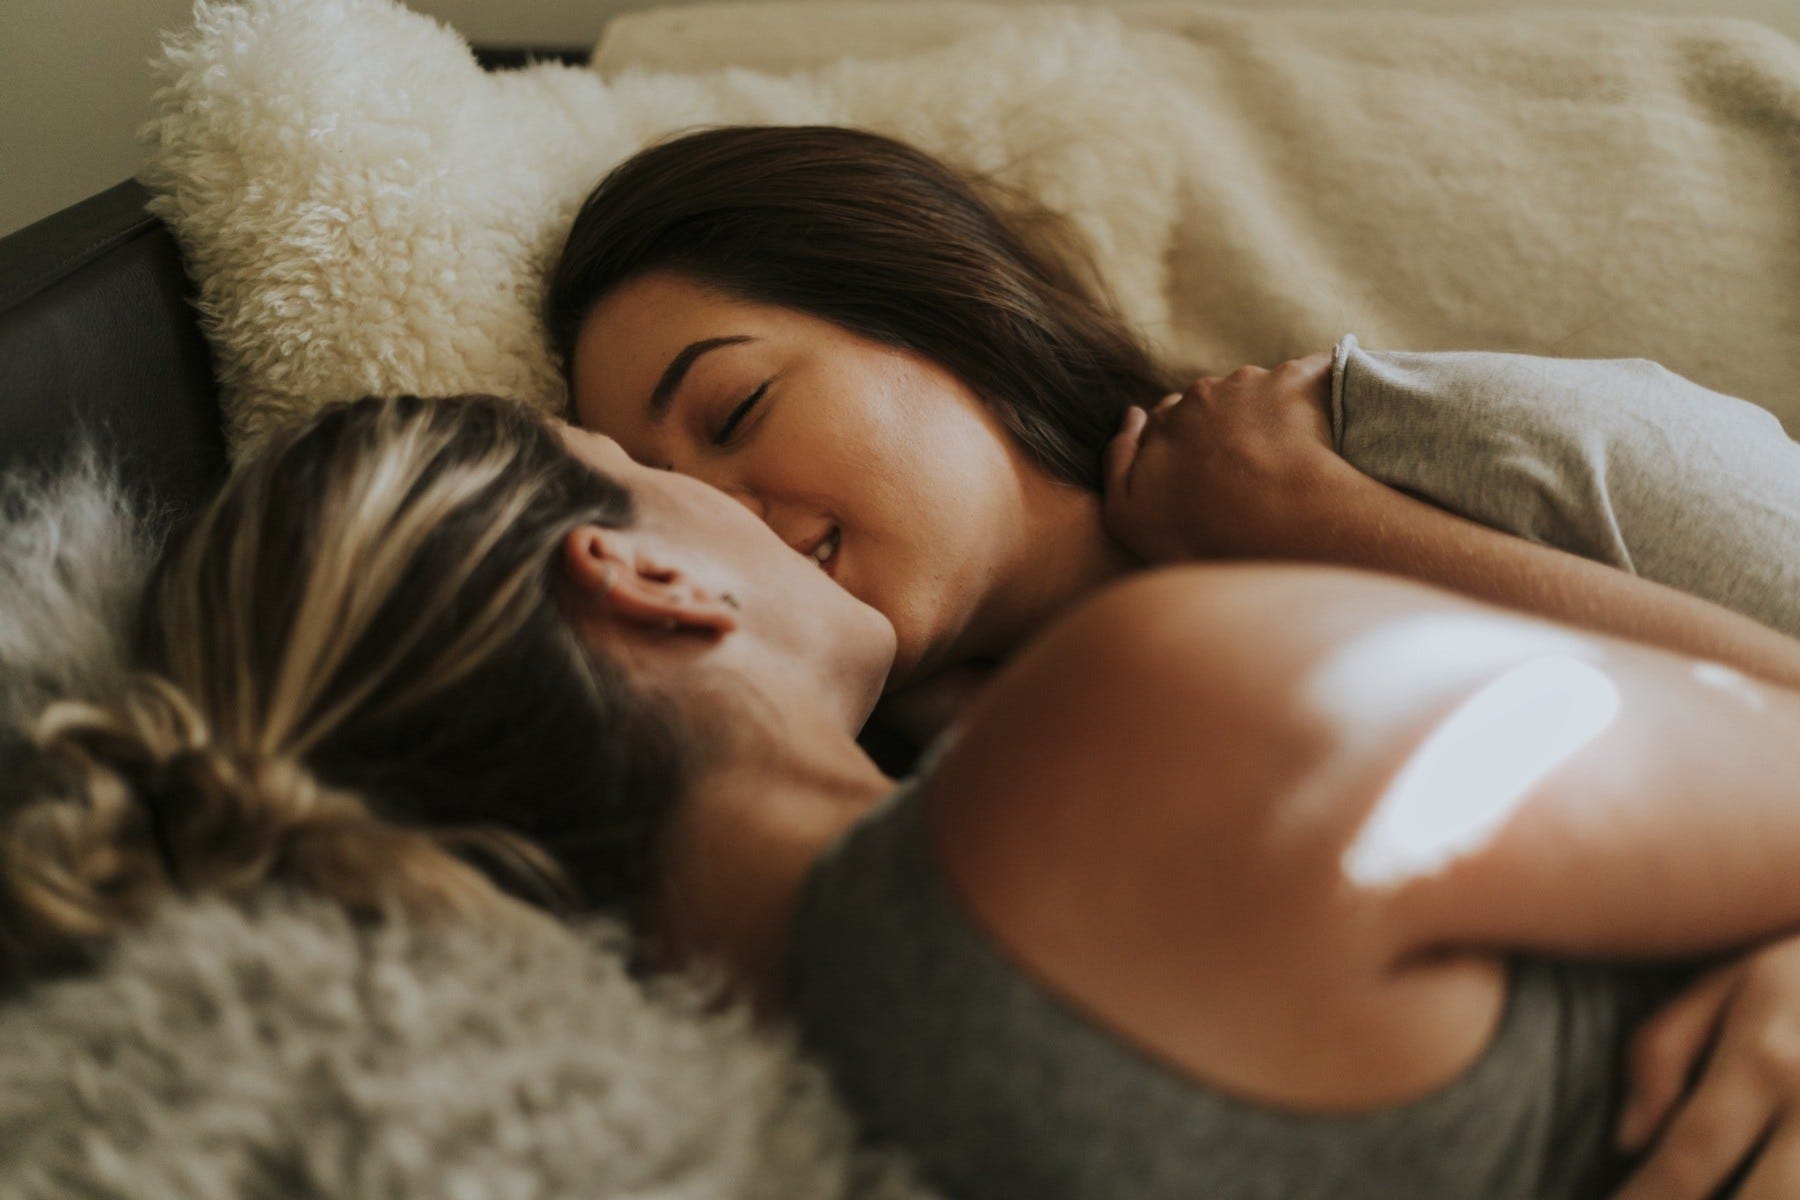 Two women kissing and smiling in bed